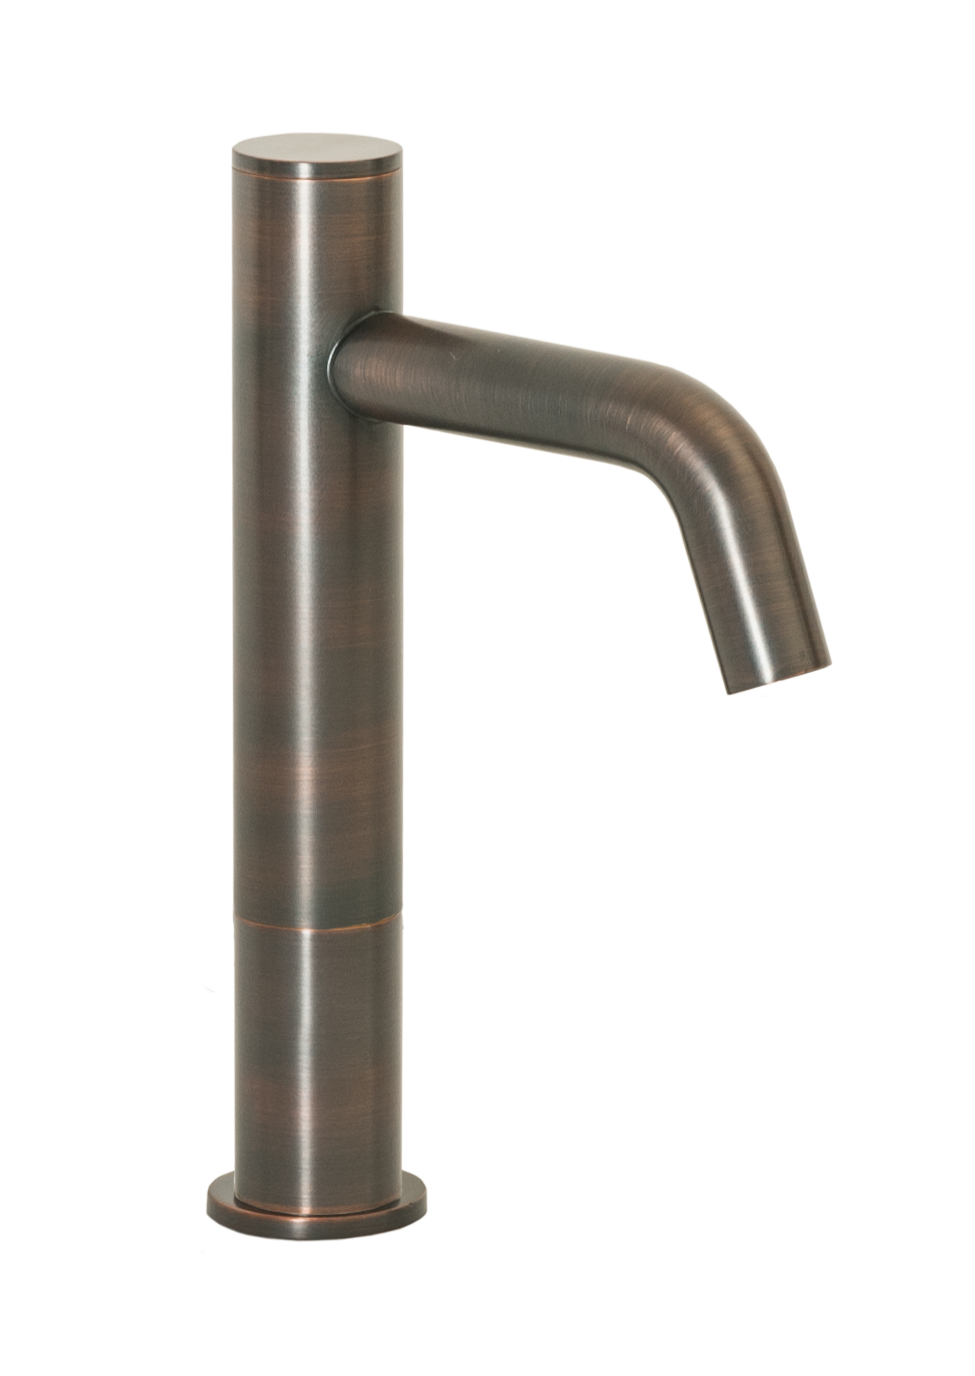 FA-3263 Automatic Faucet with 6” Spout Reach and 3” Riser In Venetian Bronze